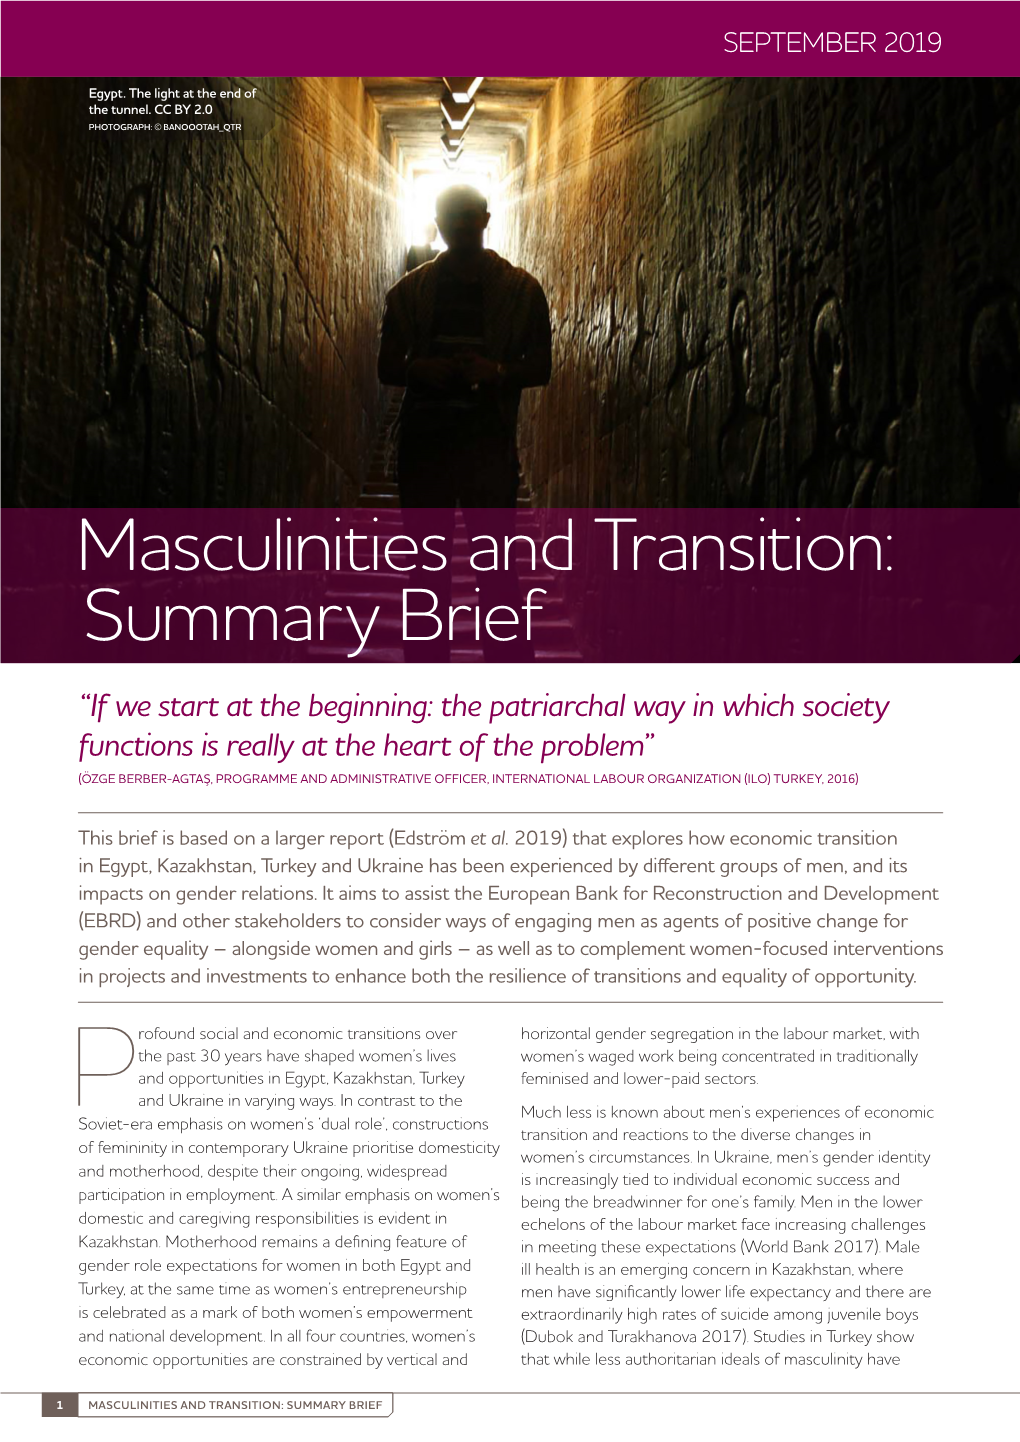 Masculinities and Transition: Summary Brief